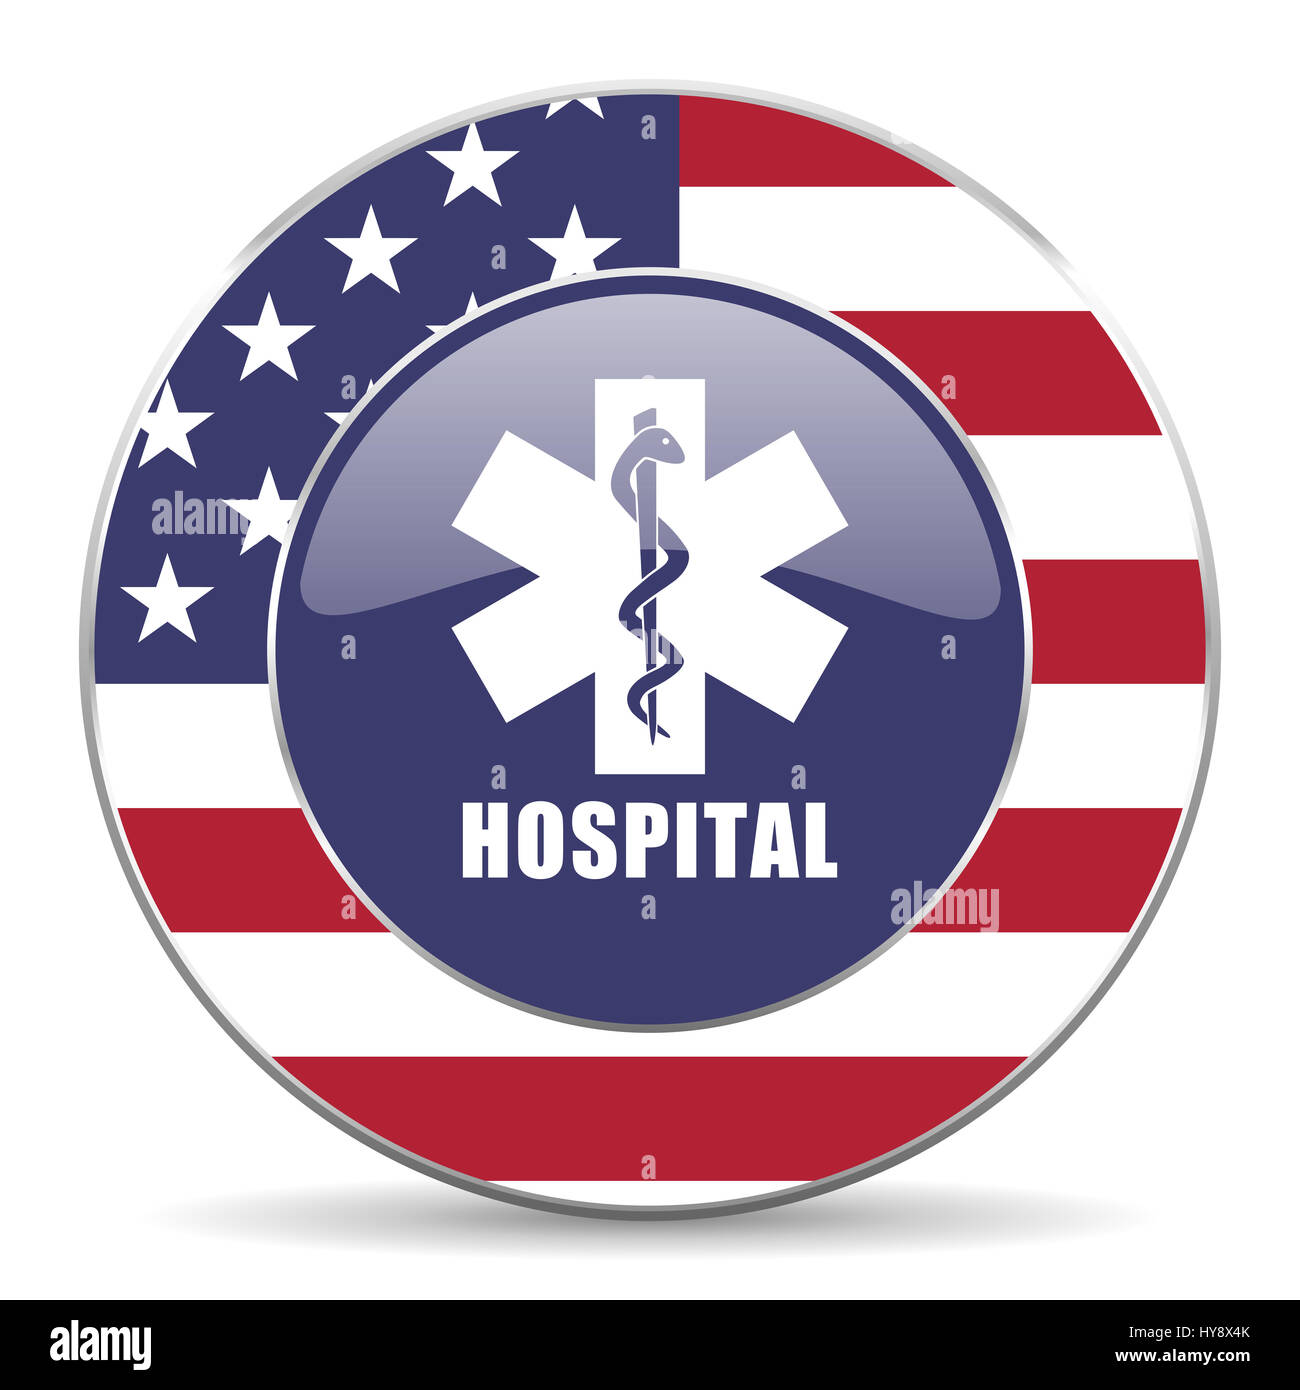 Hospital usa design web american round internet icon with shadow on white background. Stock Photo